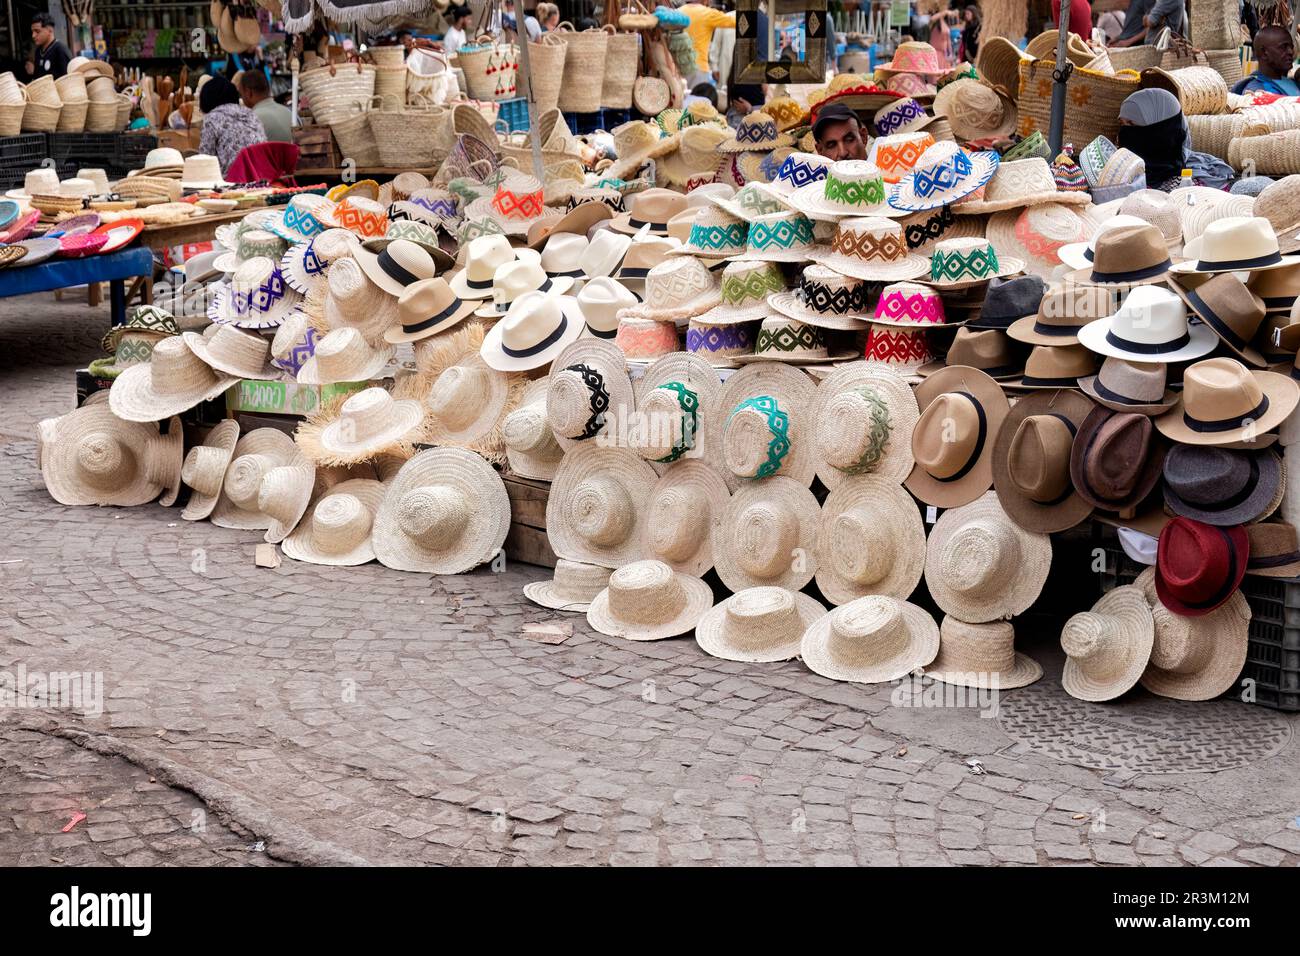 An open air market stall in the central Souk area of the Medina, Marrakesh. the stall selling hand made straw hats has plenty of assorted hat choices Stock Photo